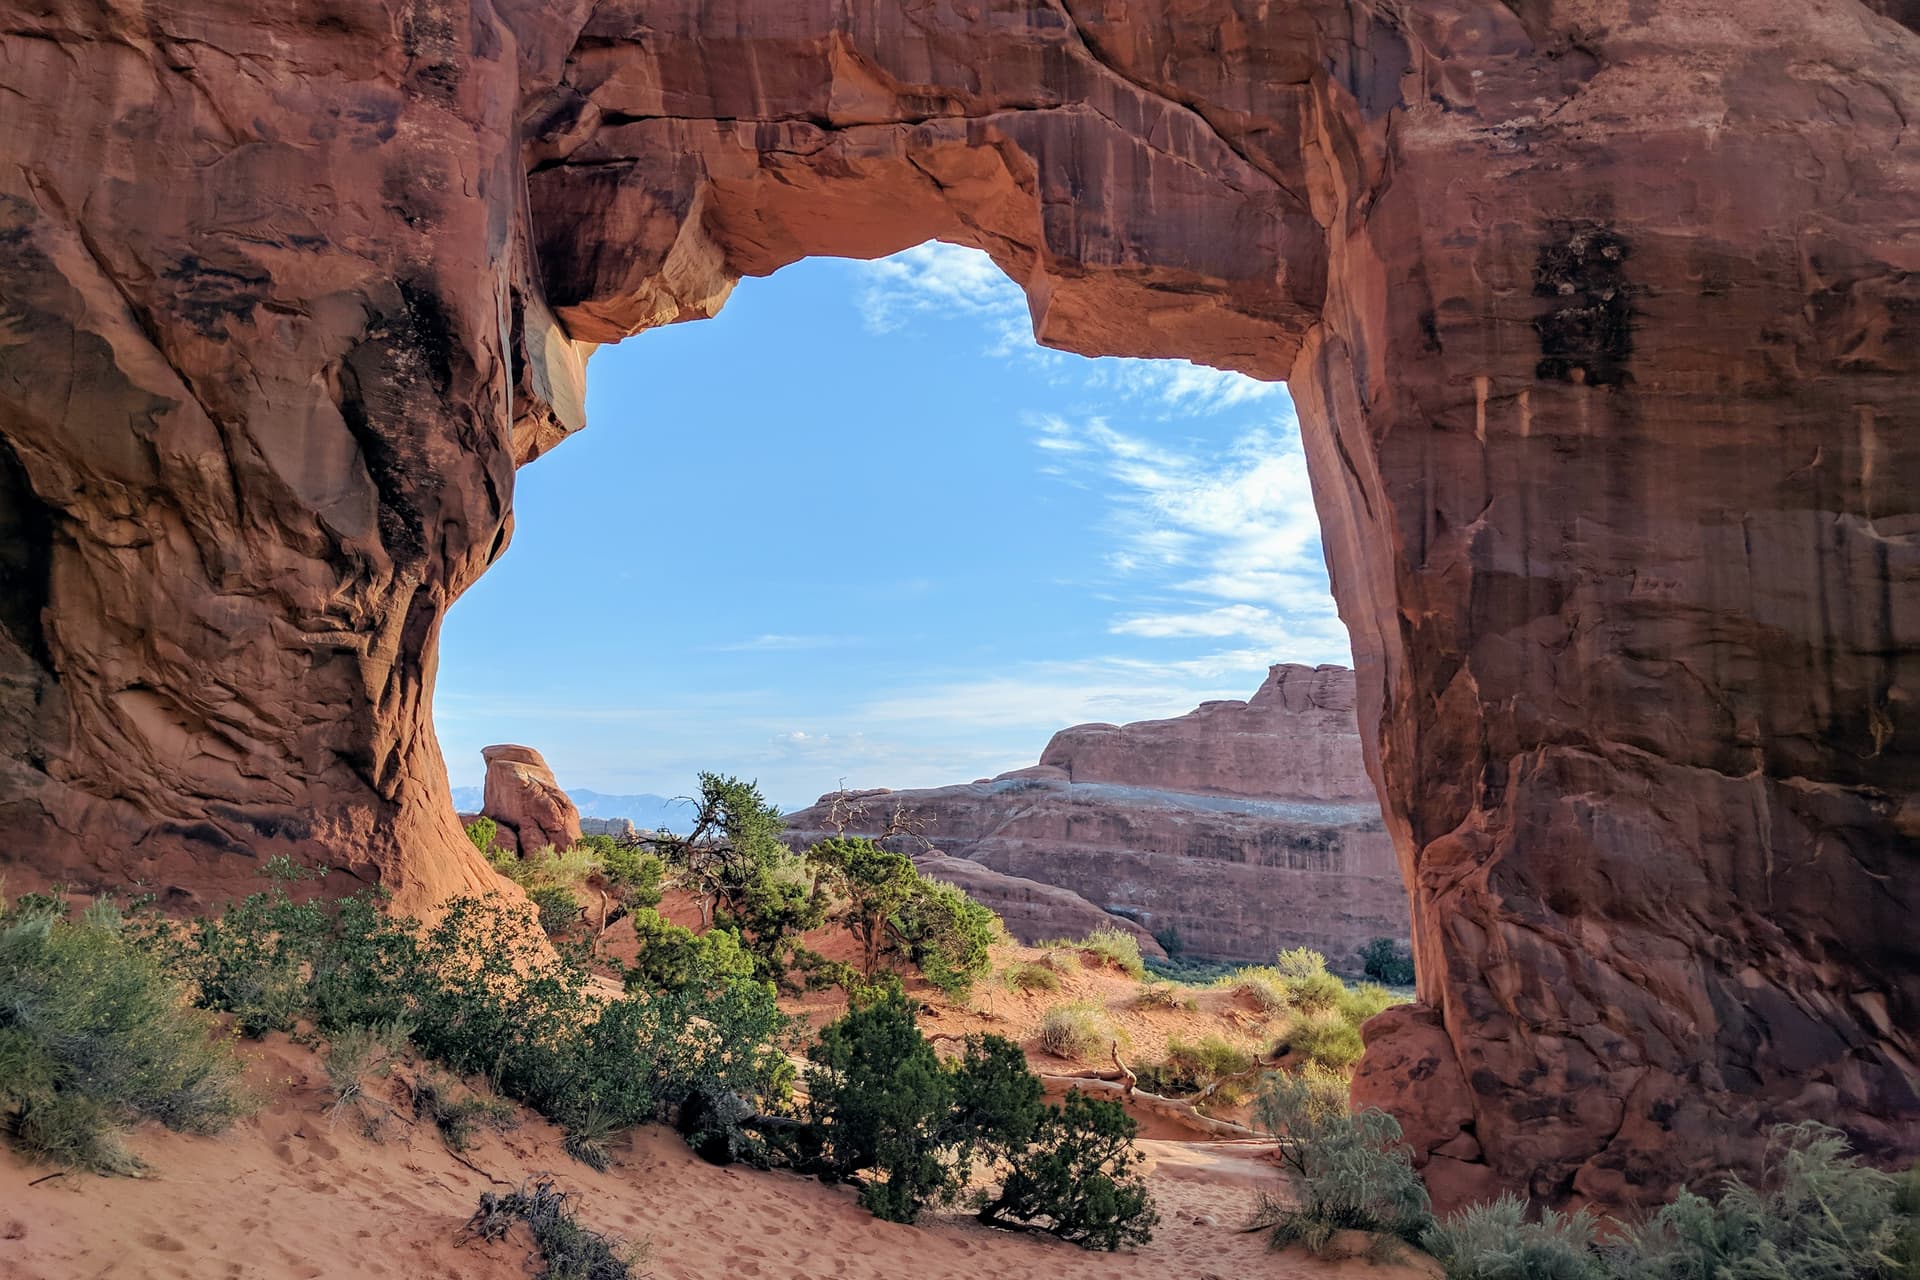 Looking through Pine Tree Arch in Arches National Park. The stone of the arch is exceptionally red, and the ground very sandy. Small desert shrubs grow on either side of the arch.